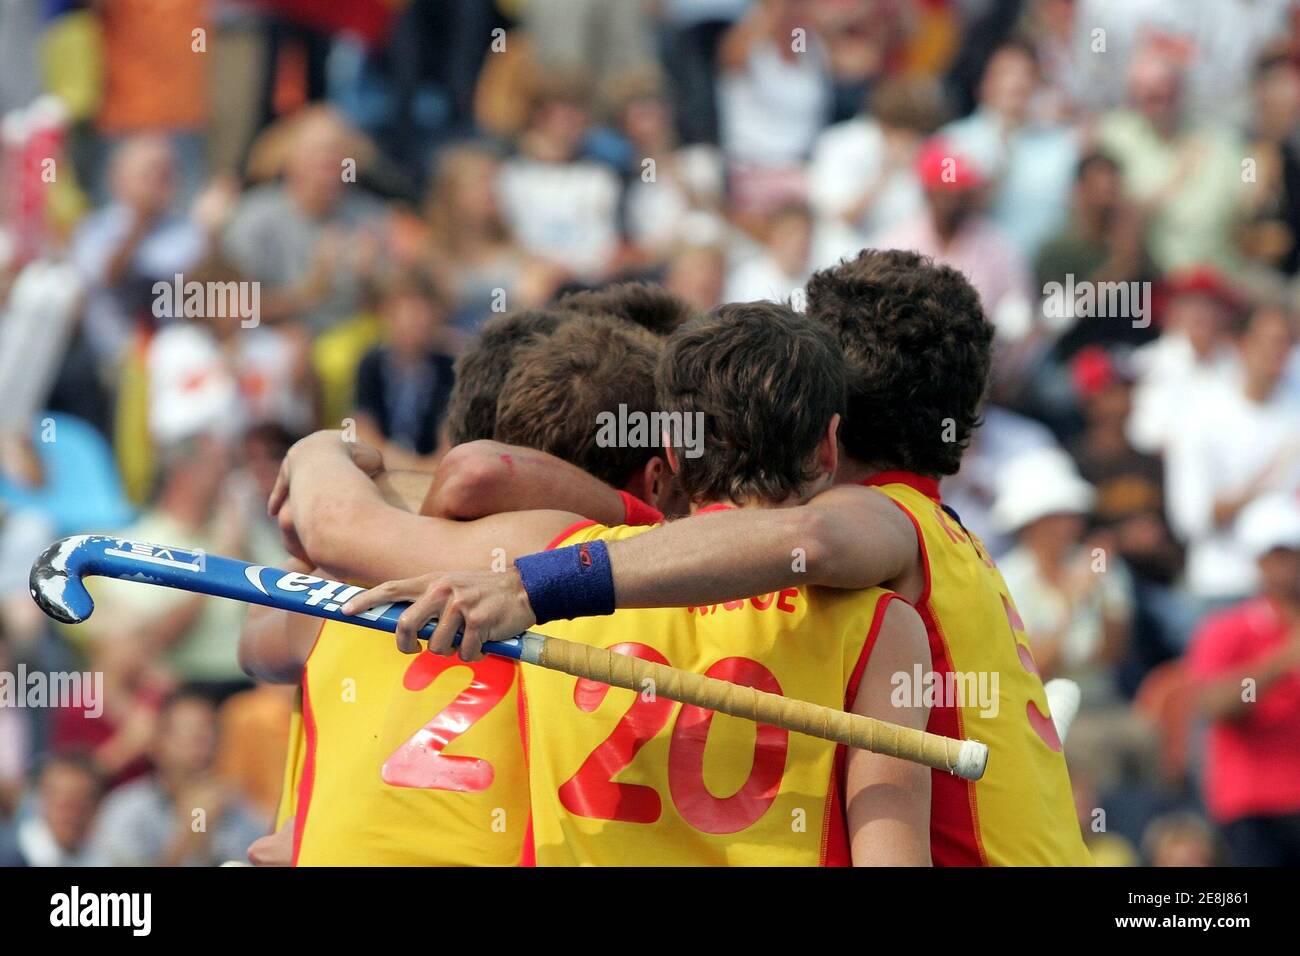 Spain's field hockey players celebrate after scoring against South Korea during their Men's Field Hockey World Cup third place match at the Warsteiner Hockey Park stadium in Moenchengladbach September 17, 2006. Spain won the game and ended the tournament in  third place. REUTERS/Pascal Lauener  (GERMANY) Stock Photo